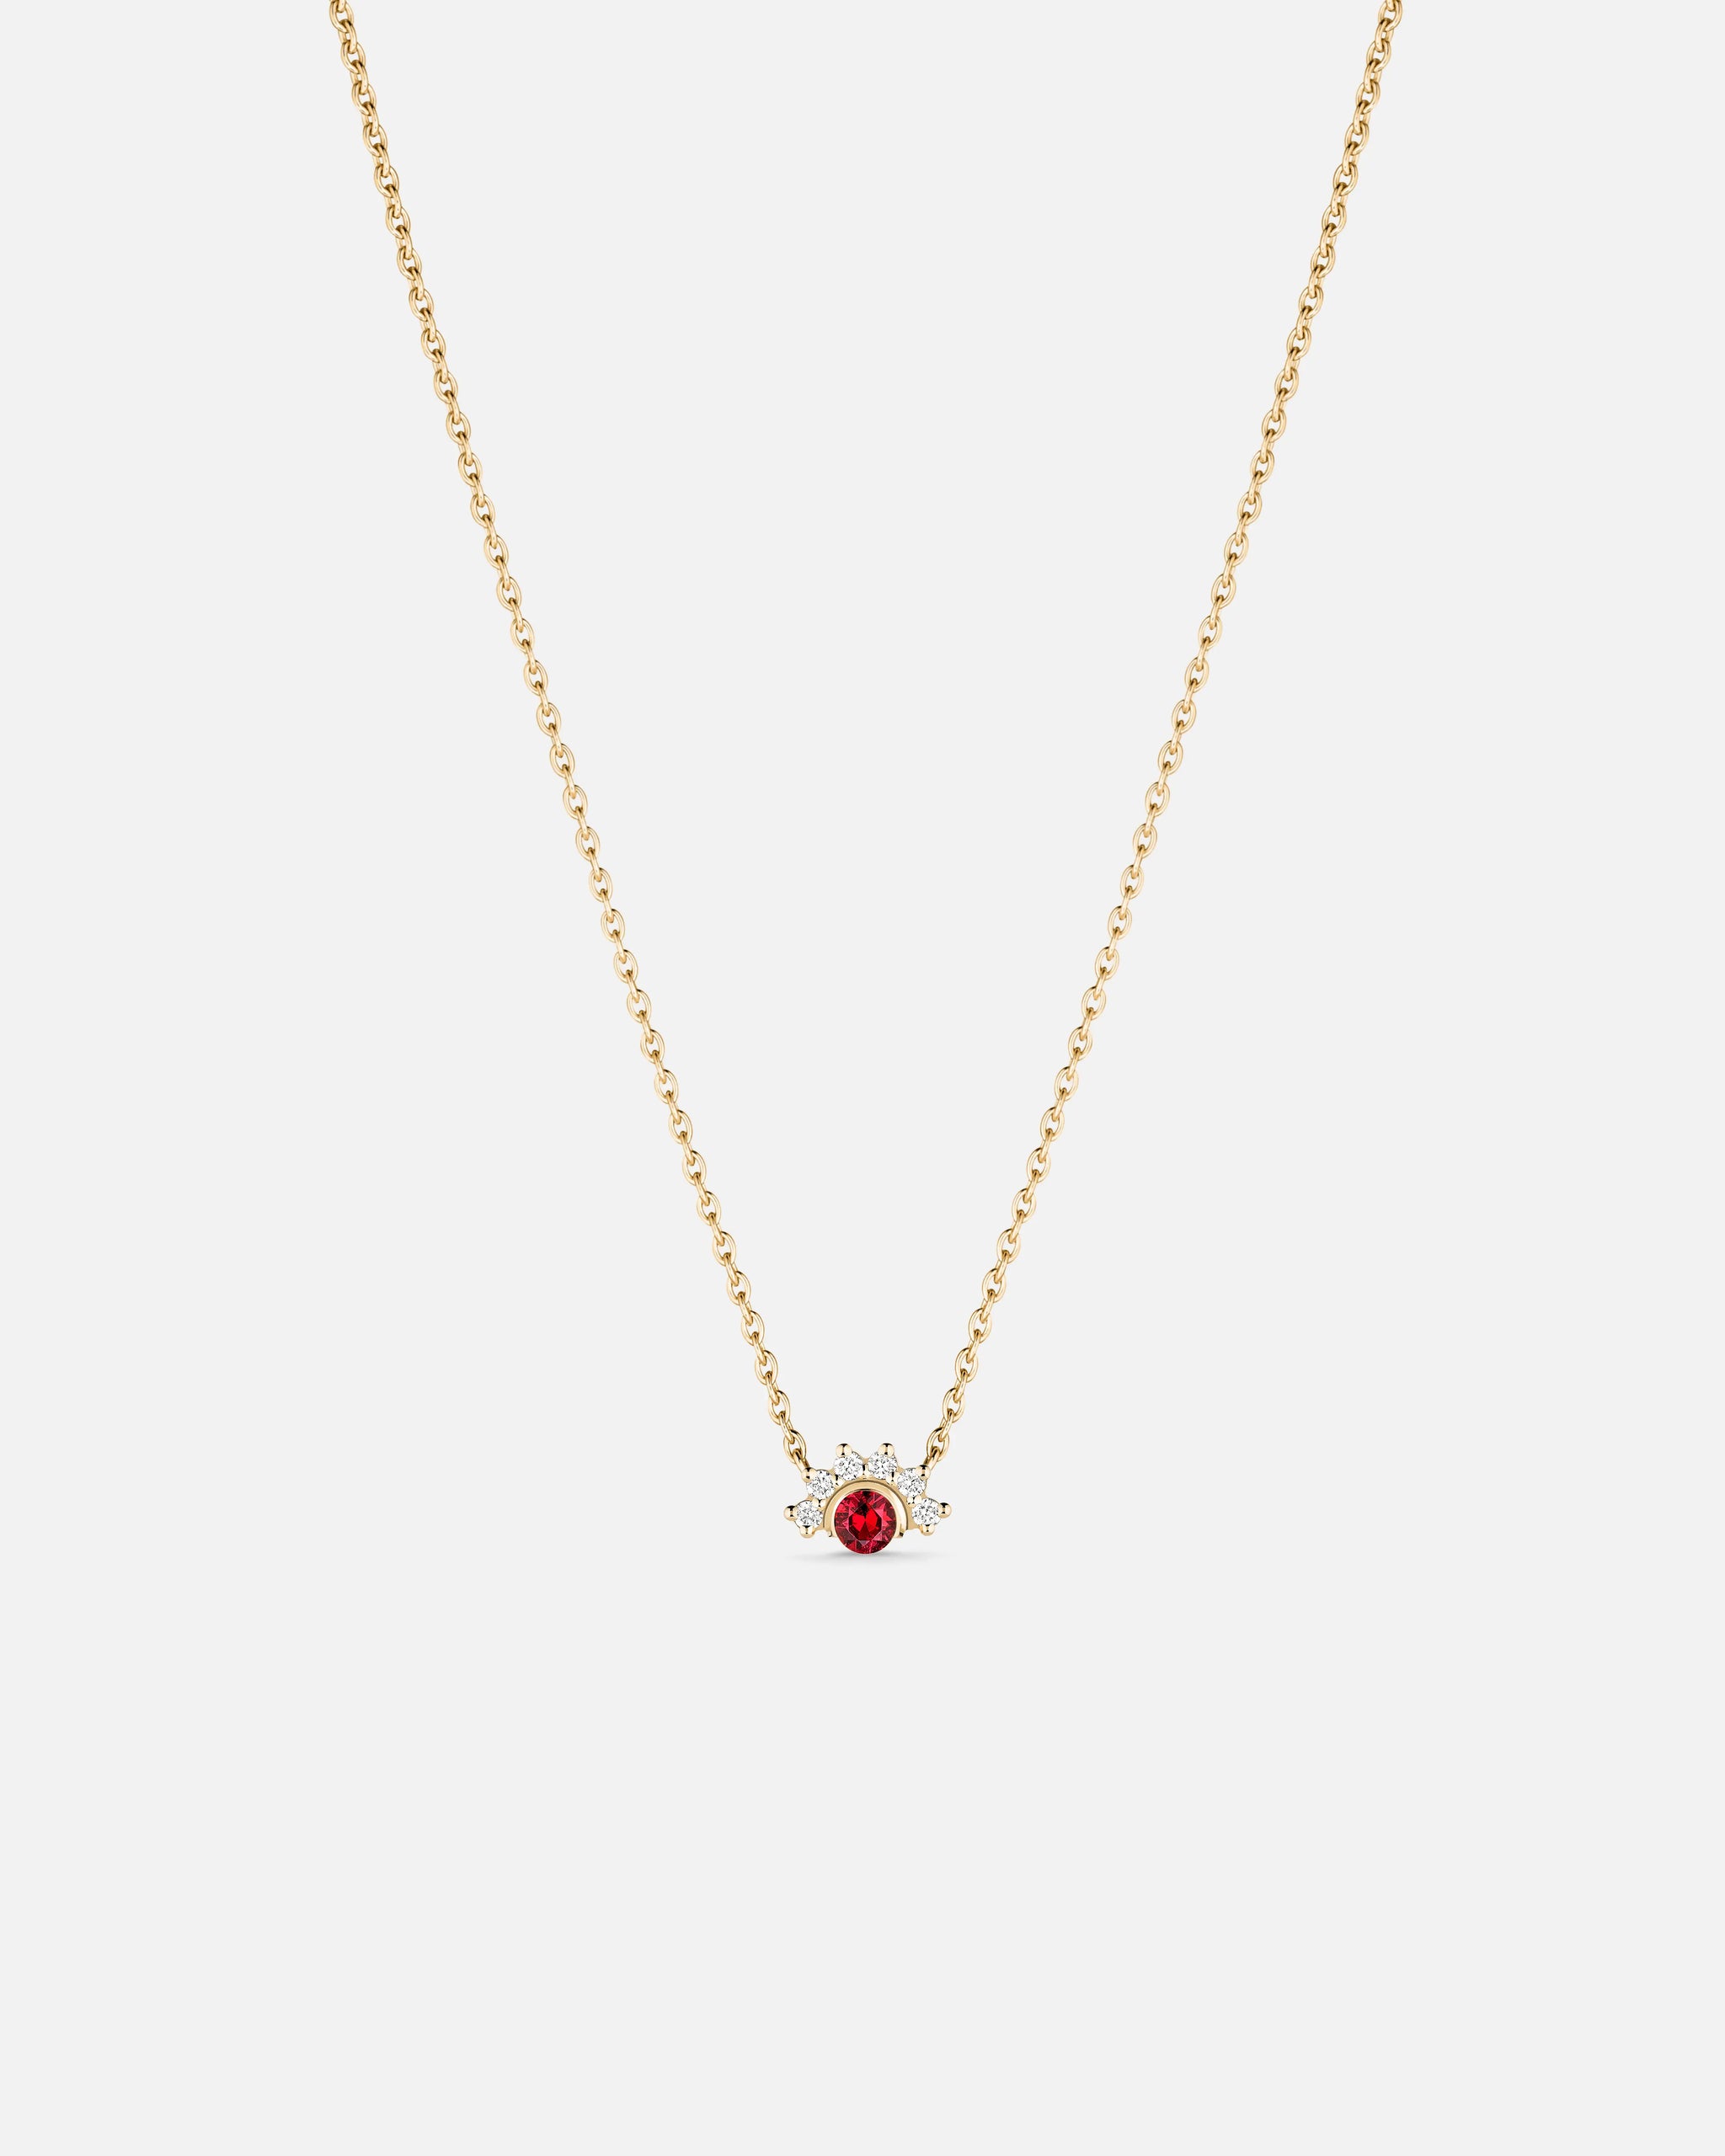 Red Spinel Pendant in Yellow Gold - 1 - Nouvel Heritage